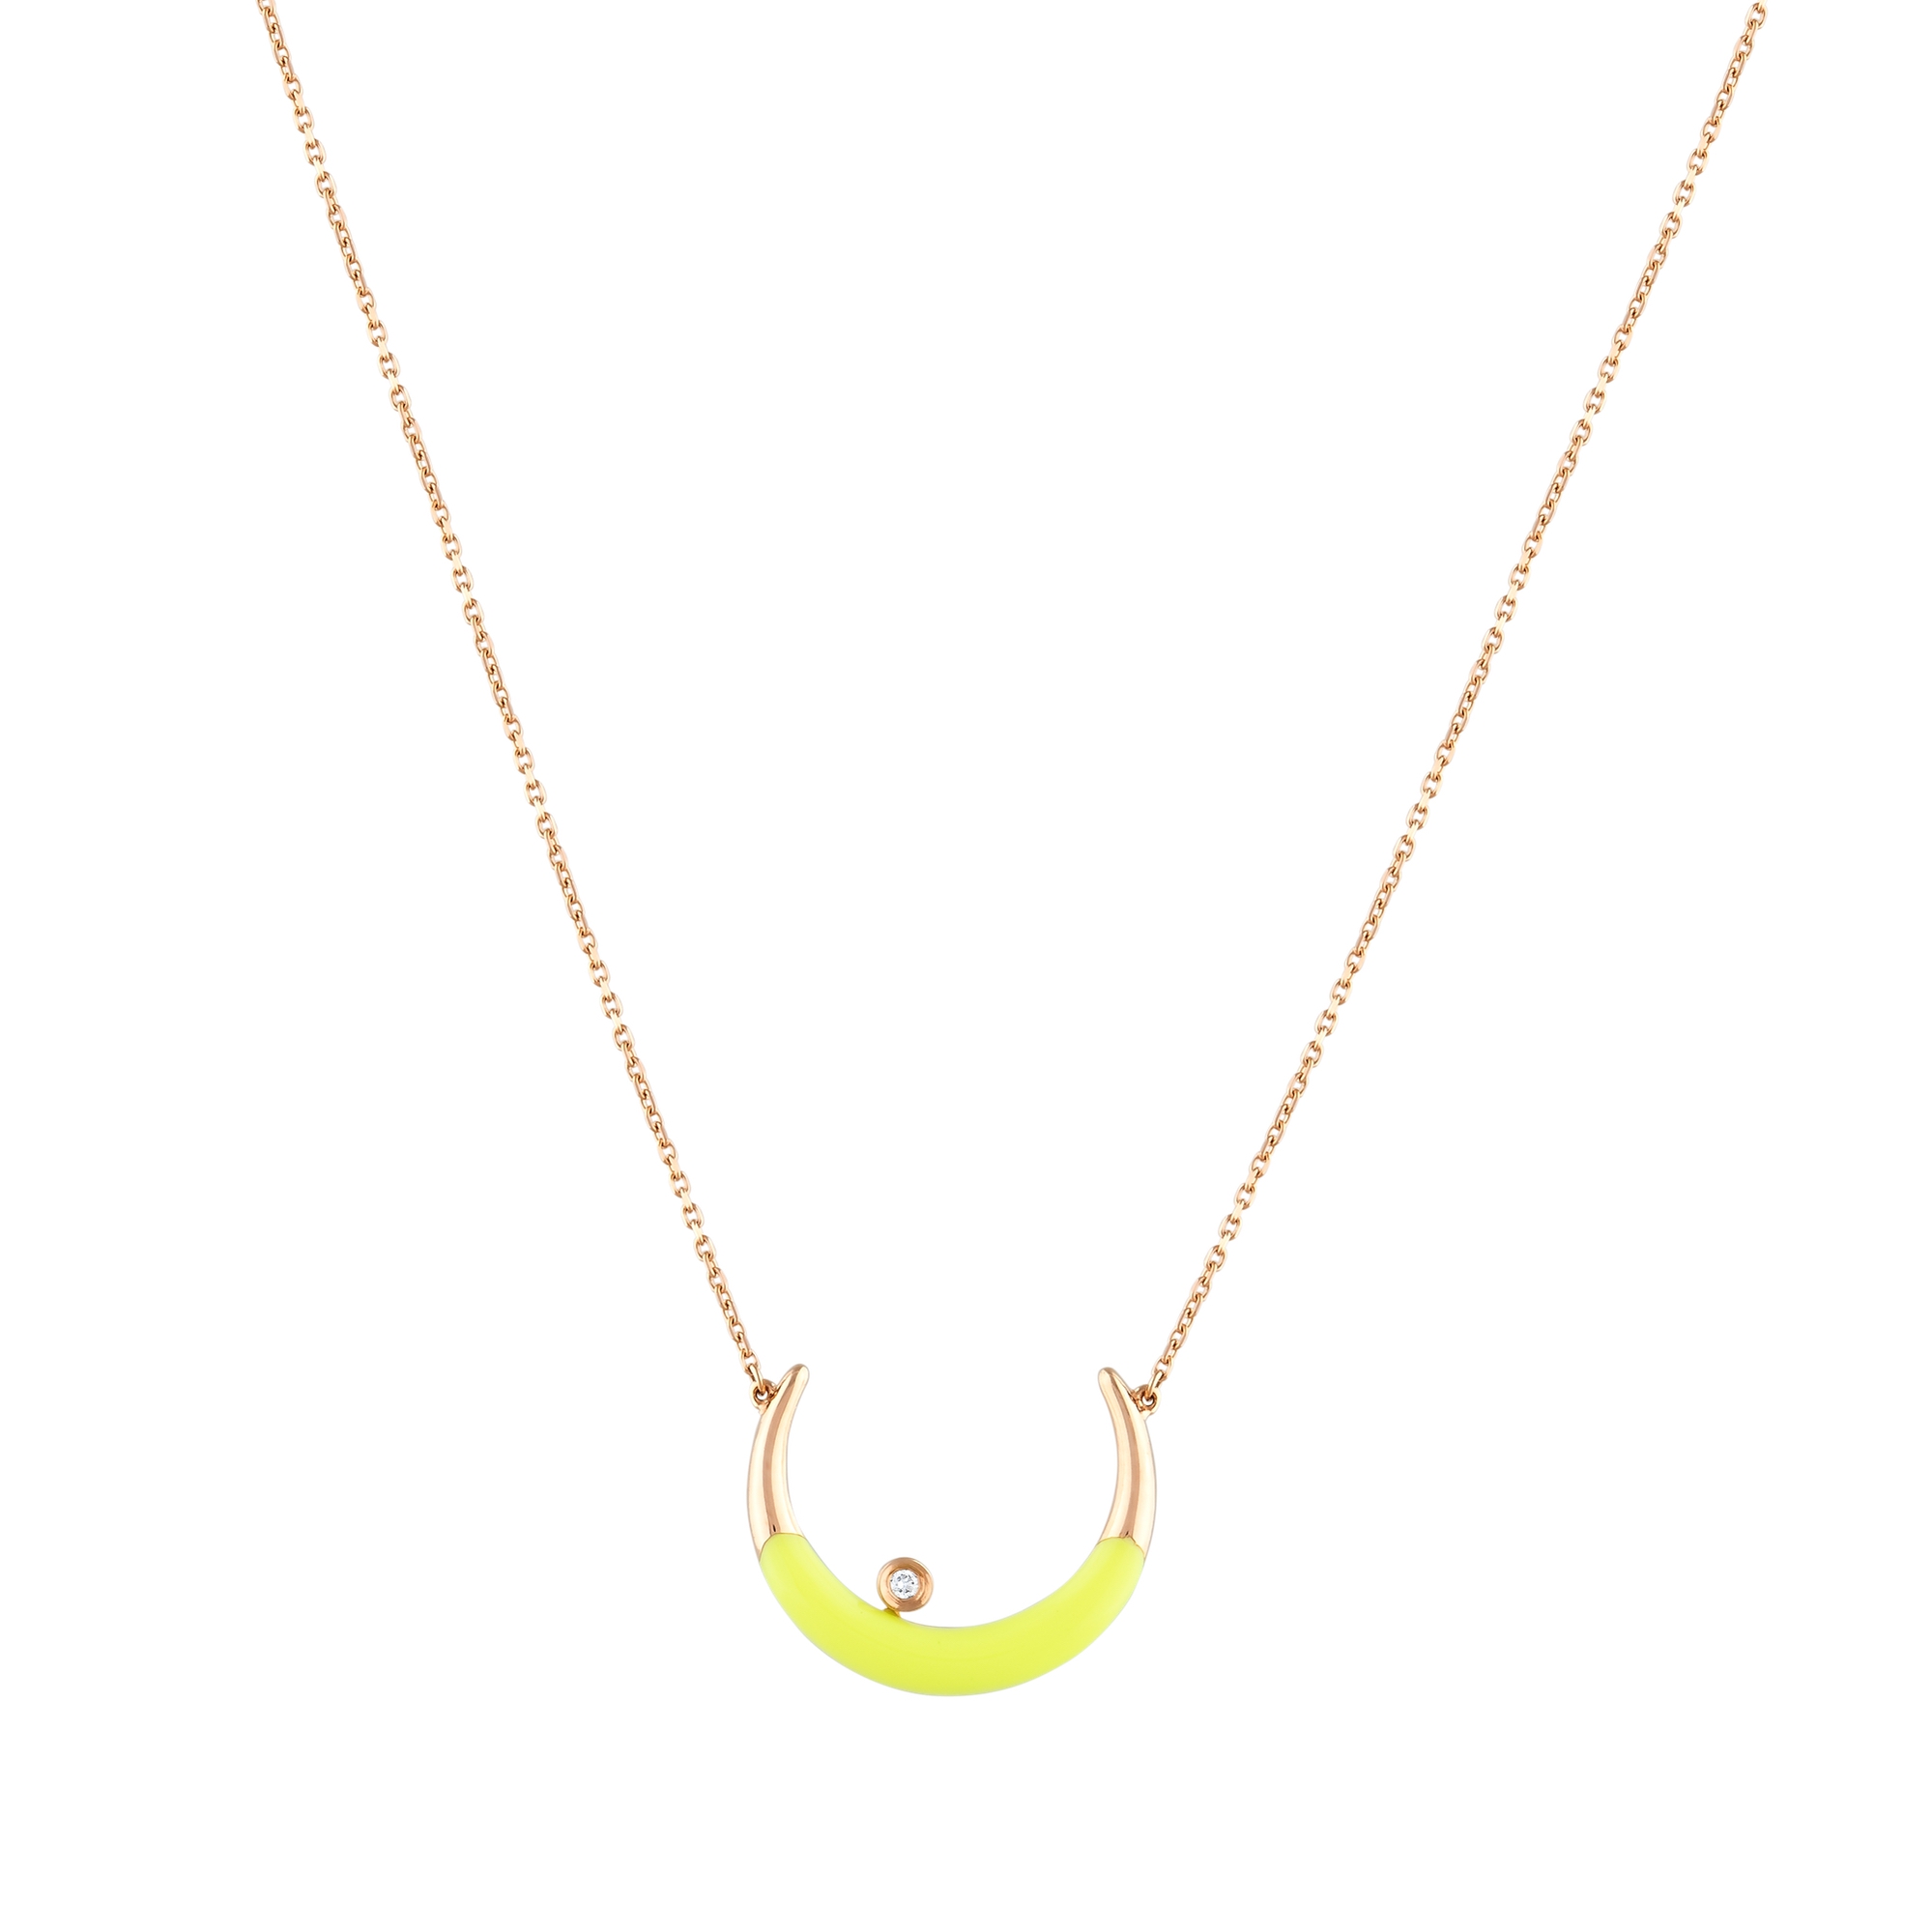 NEON NECKLACE